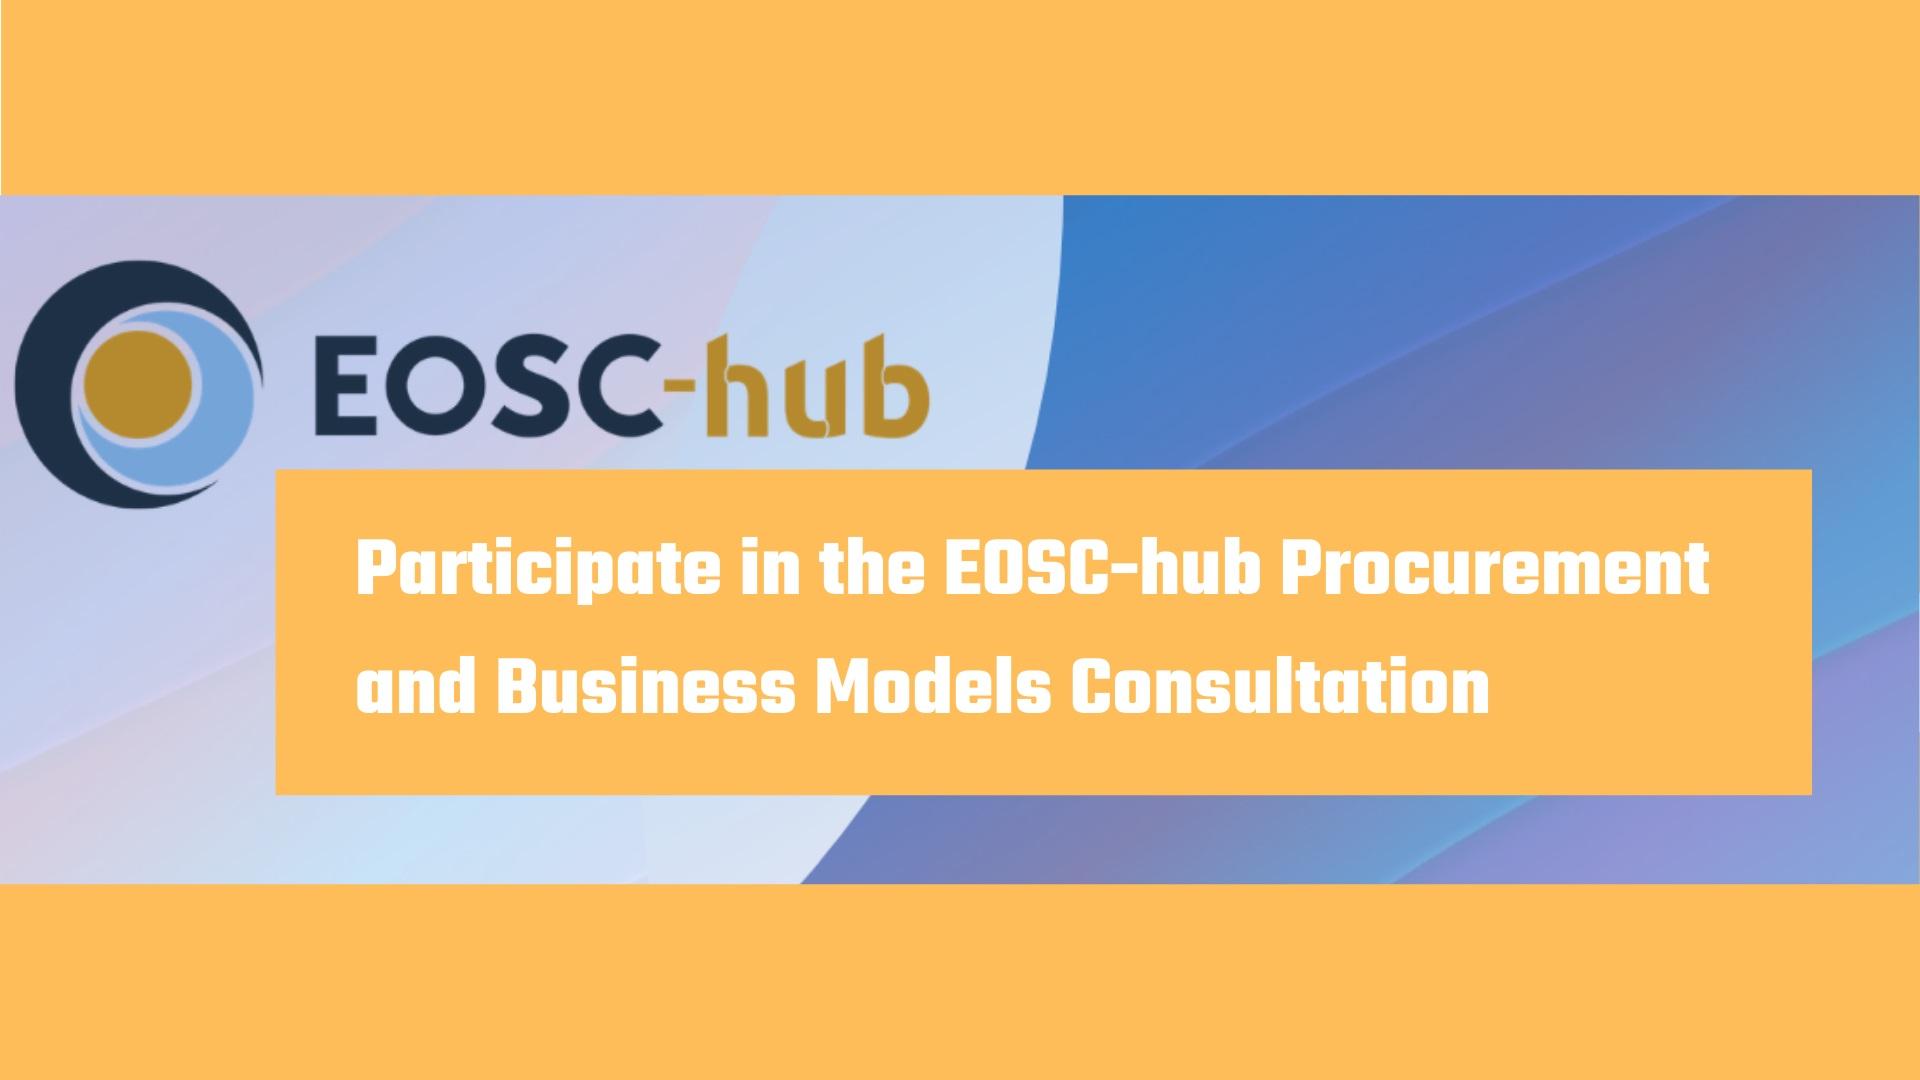 Participate in the EOSC-hub Procurement and Business Models Consultation